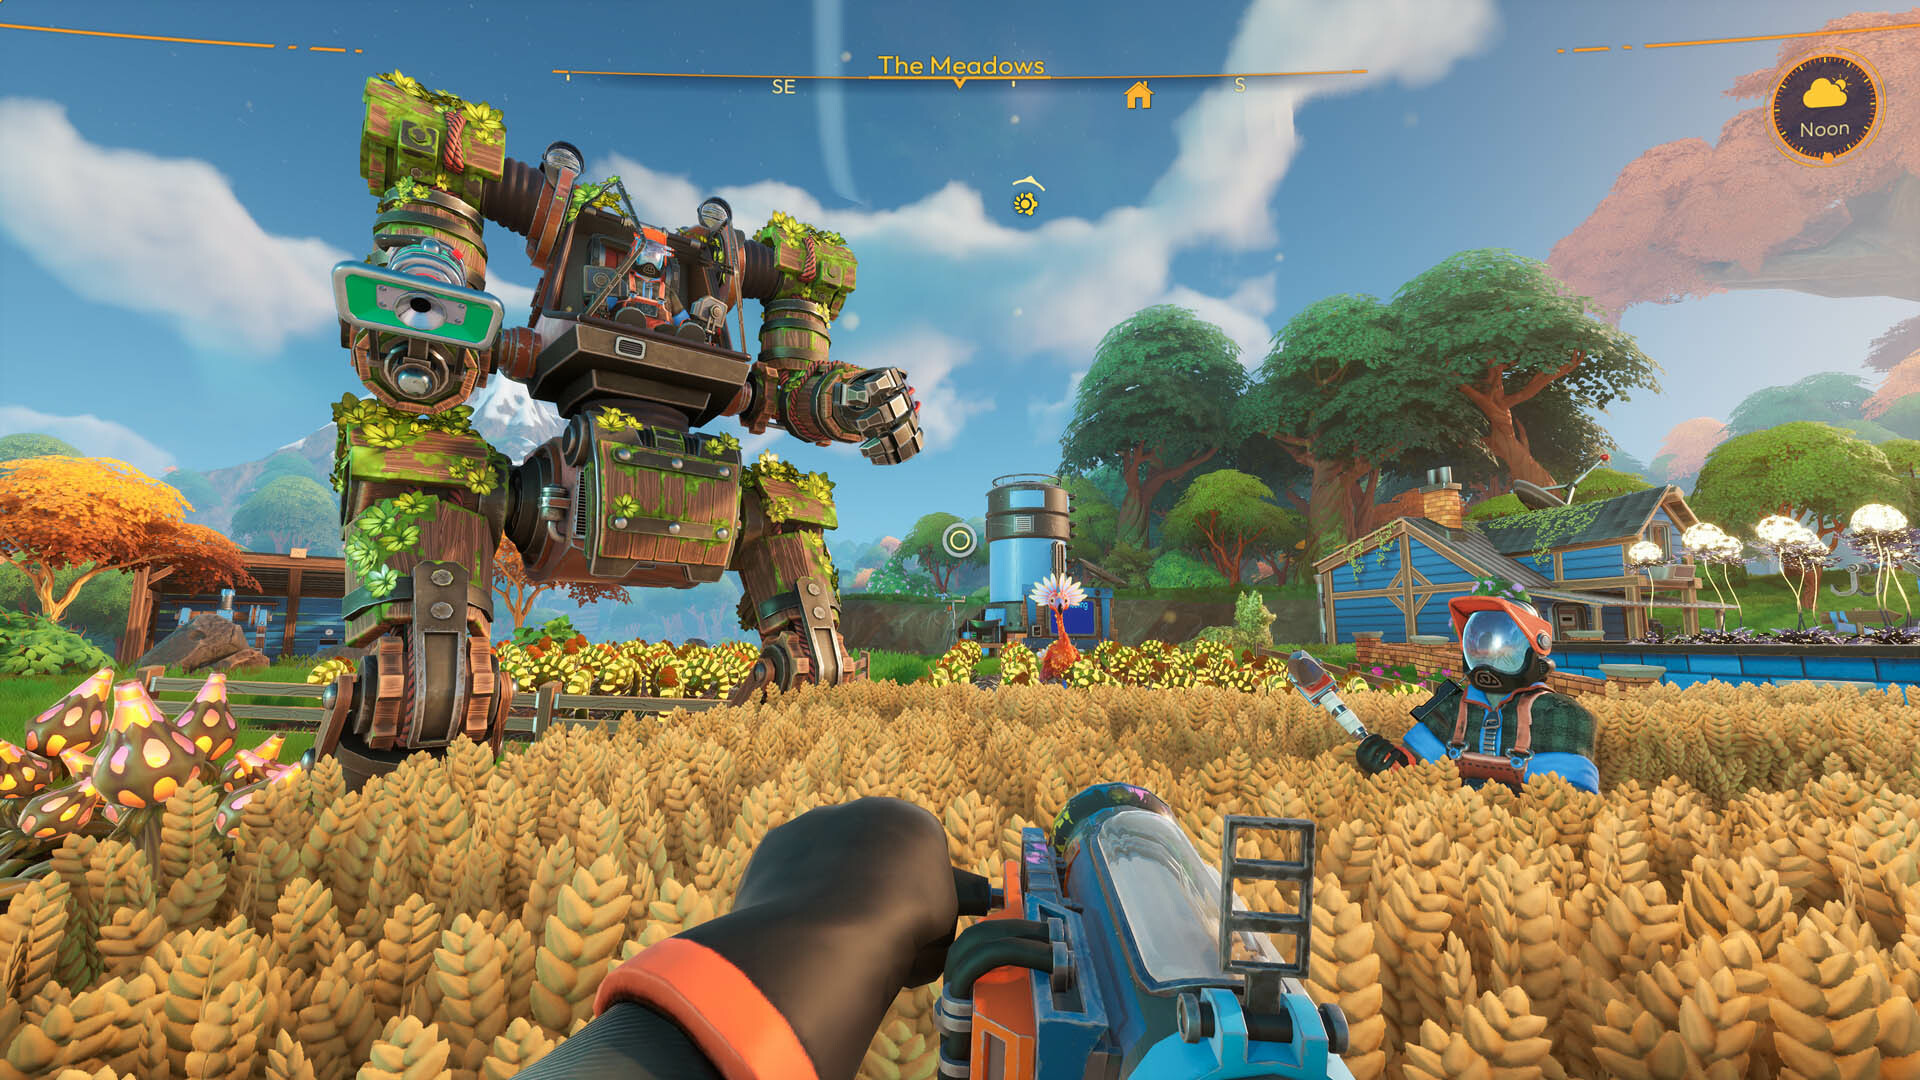 Lightyear Frontier - In first person a player stands in a golden field of wheat while another player and a leaf-covered mech stand nearby